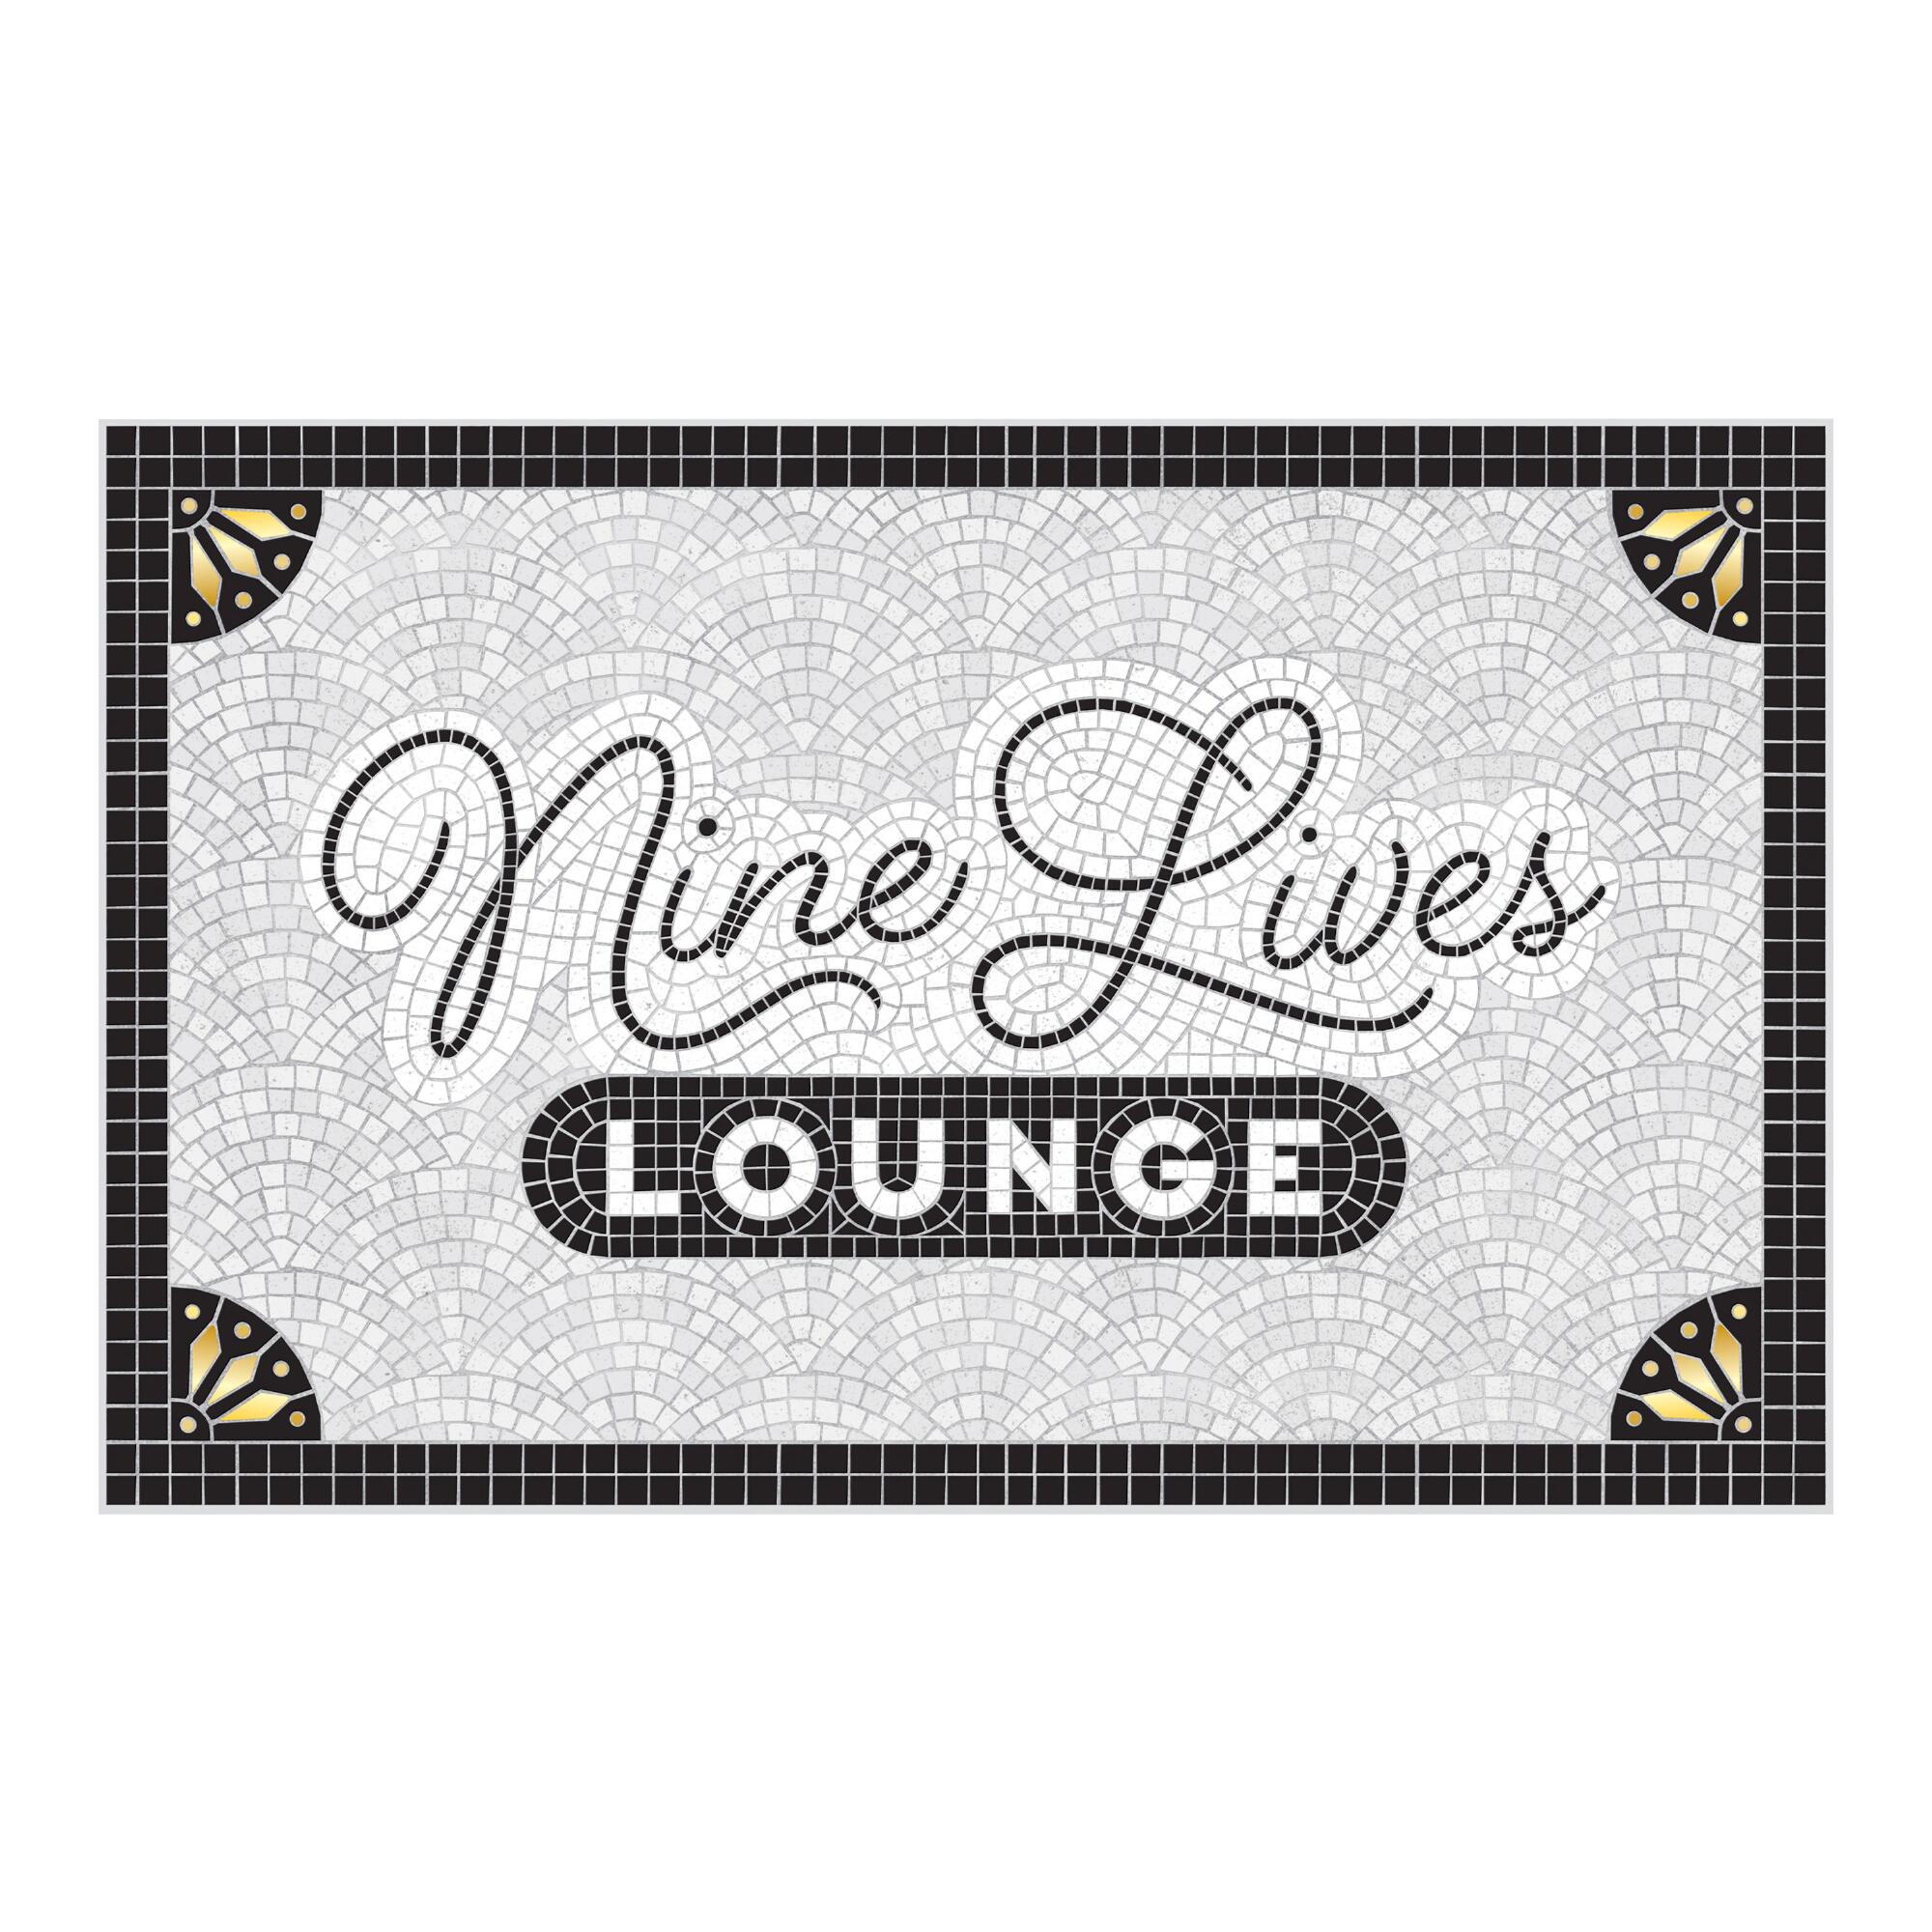 Fred Howligans Nine Lives Lounge Pet Placemat by World Market